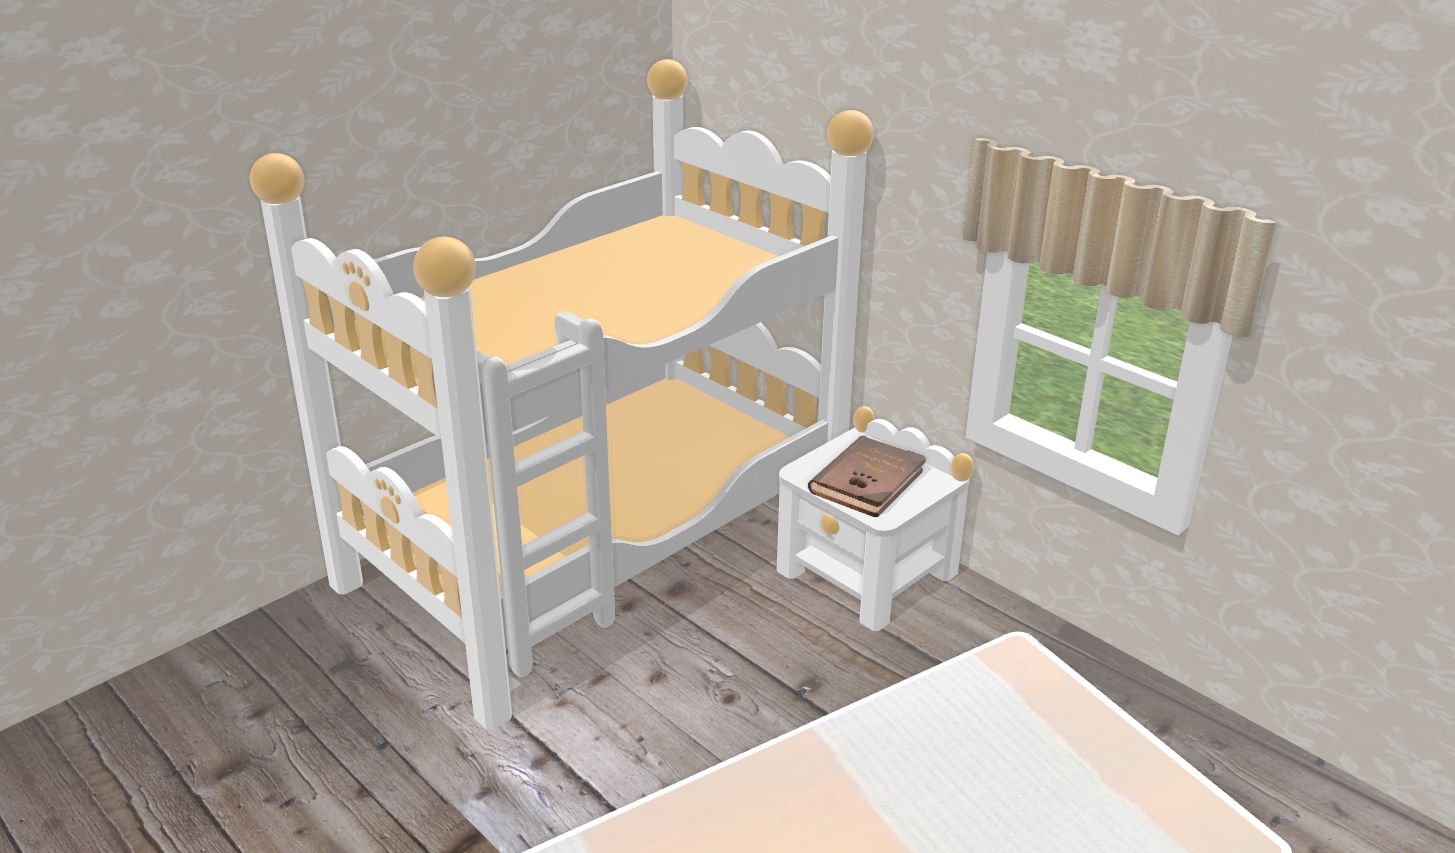 Dollhouse bed and bunk bed (with paw, heart or no decoration)